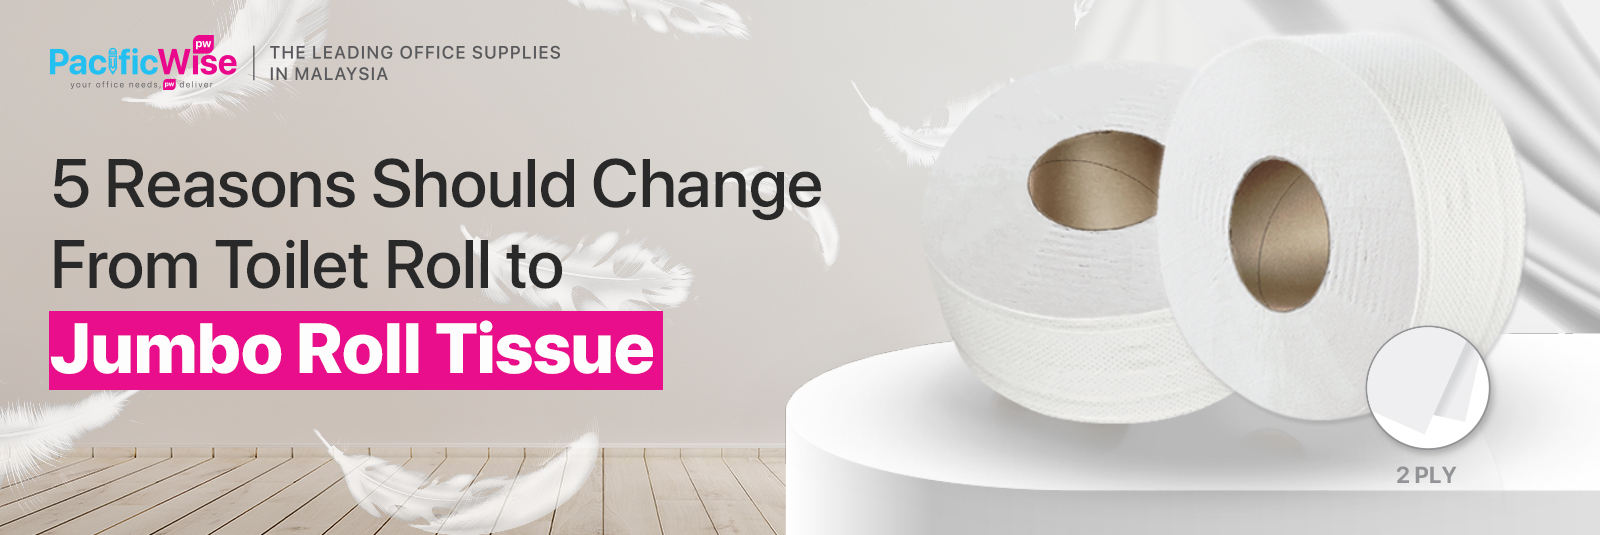 5 Reasons Should Change From Toilet Roll to Jumbo Roll Tissue